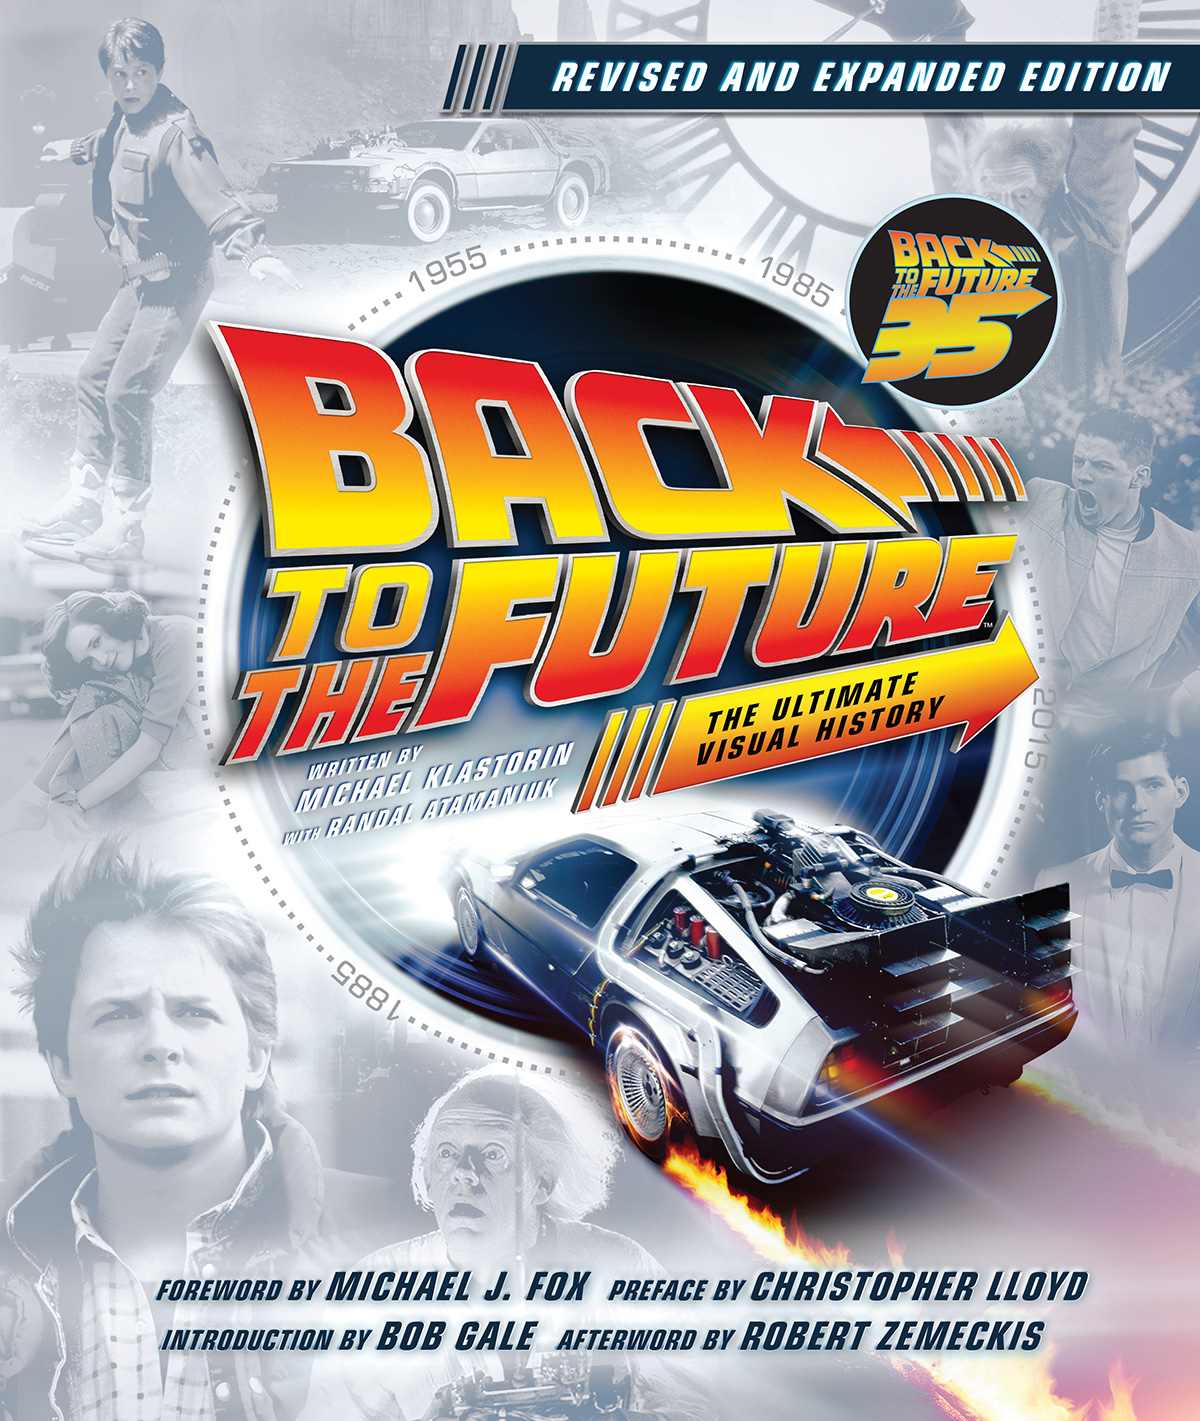 Back to the Future: The Ultimate Visual History - Revised And Expanded Edition